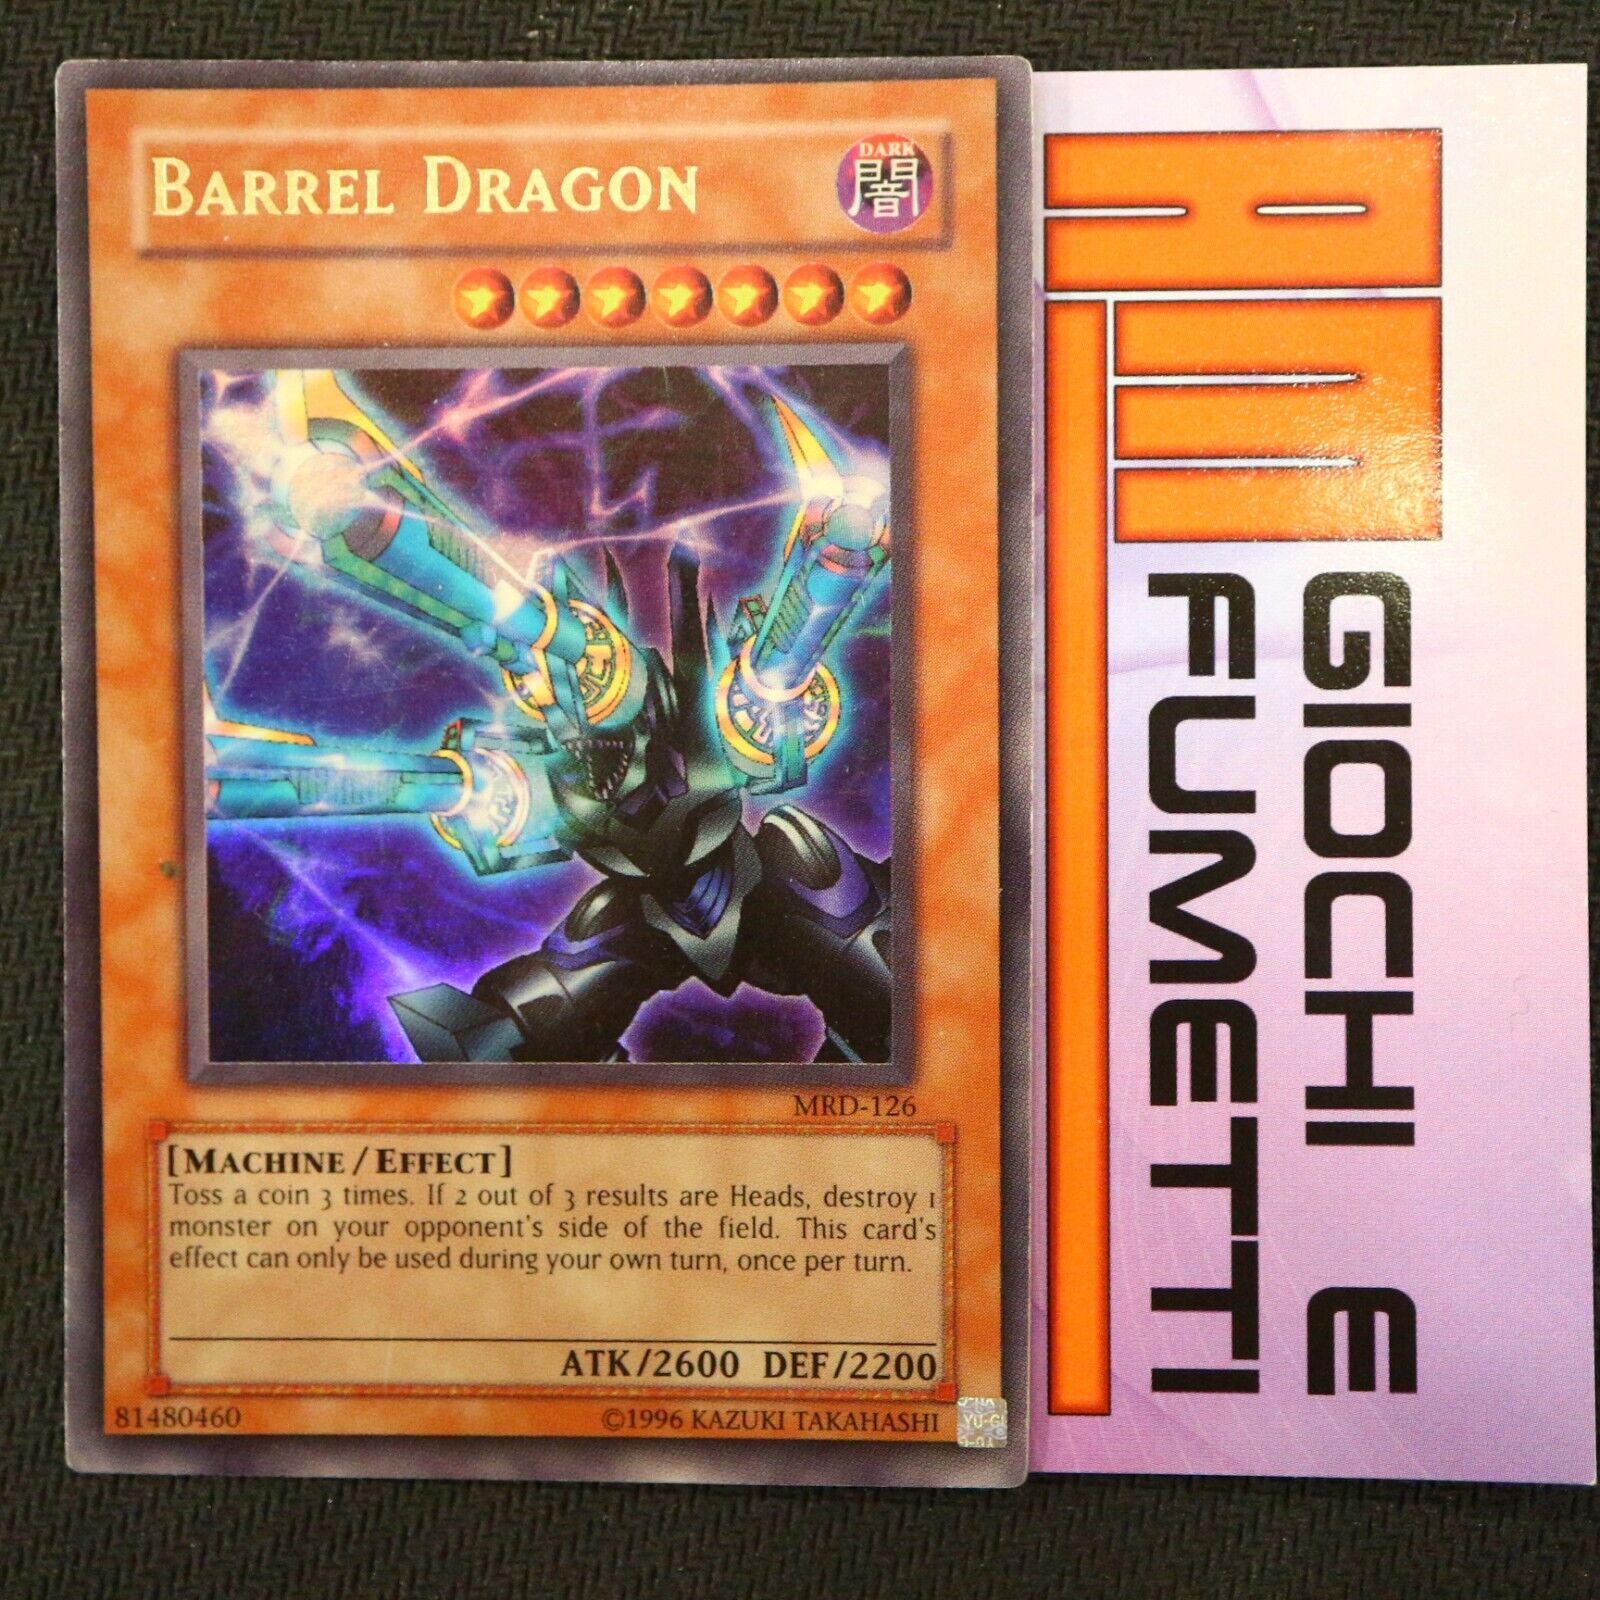 BARREL DRAGON in English YUGIOH Rare ULTRA yu-gi-oh FOR REAL COLLECTORS